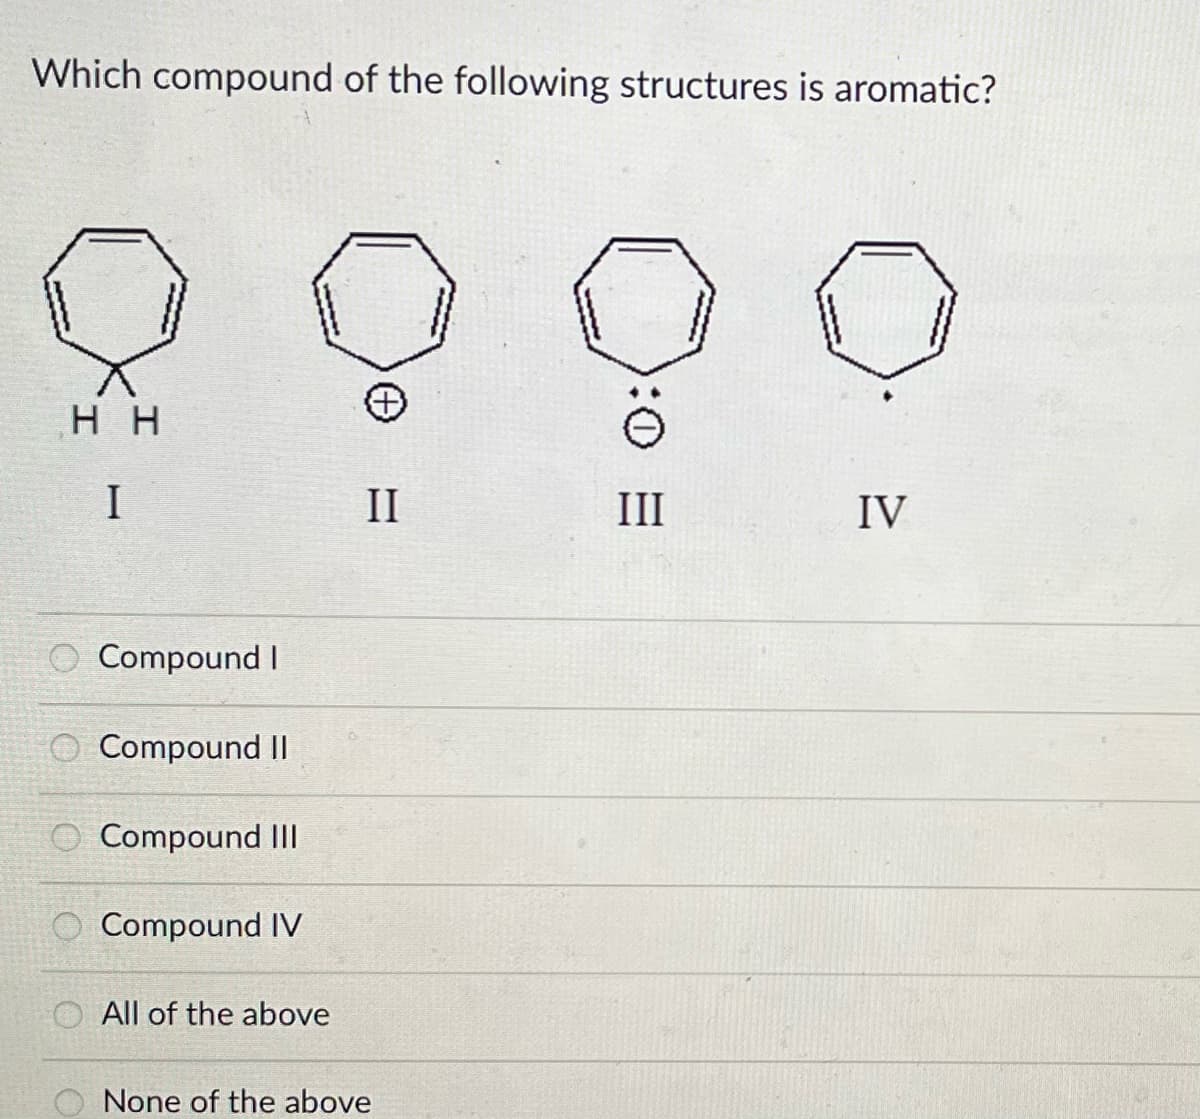 Which compound of the following structures is aromatic?
HH
I
Compound I
Compound II
::::
Compound III
Compound IV
All of the above
II
None of the above
:0
III
IV